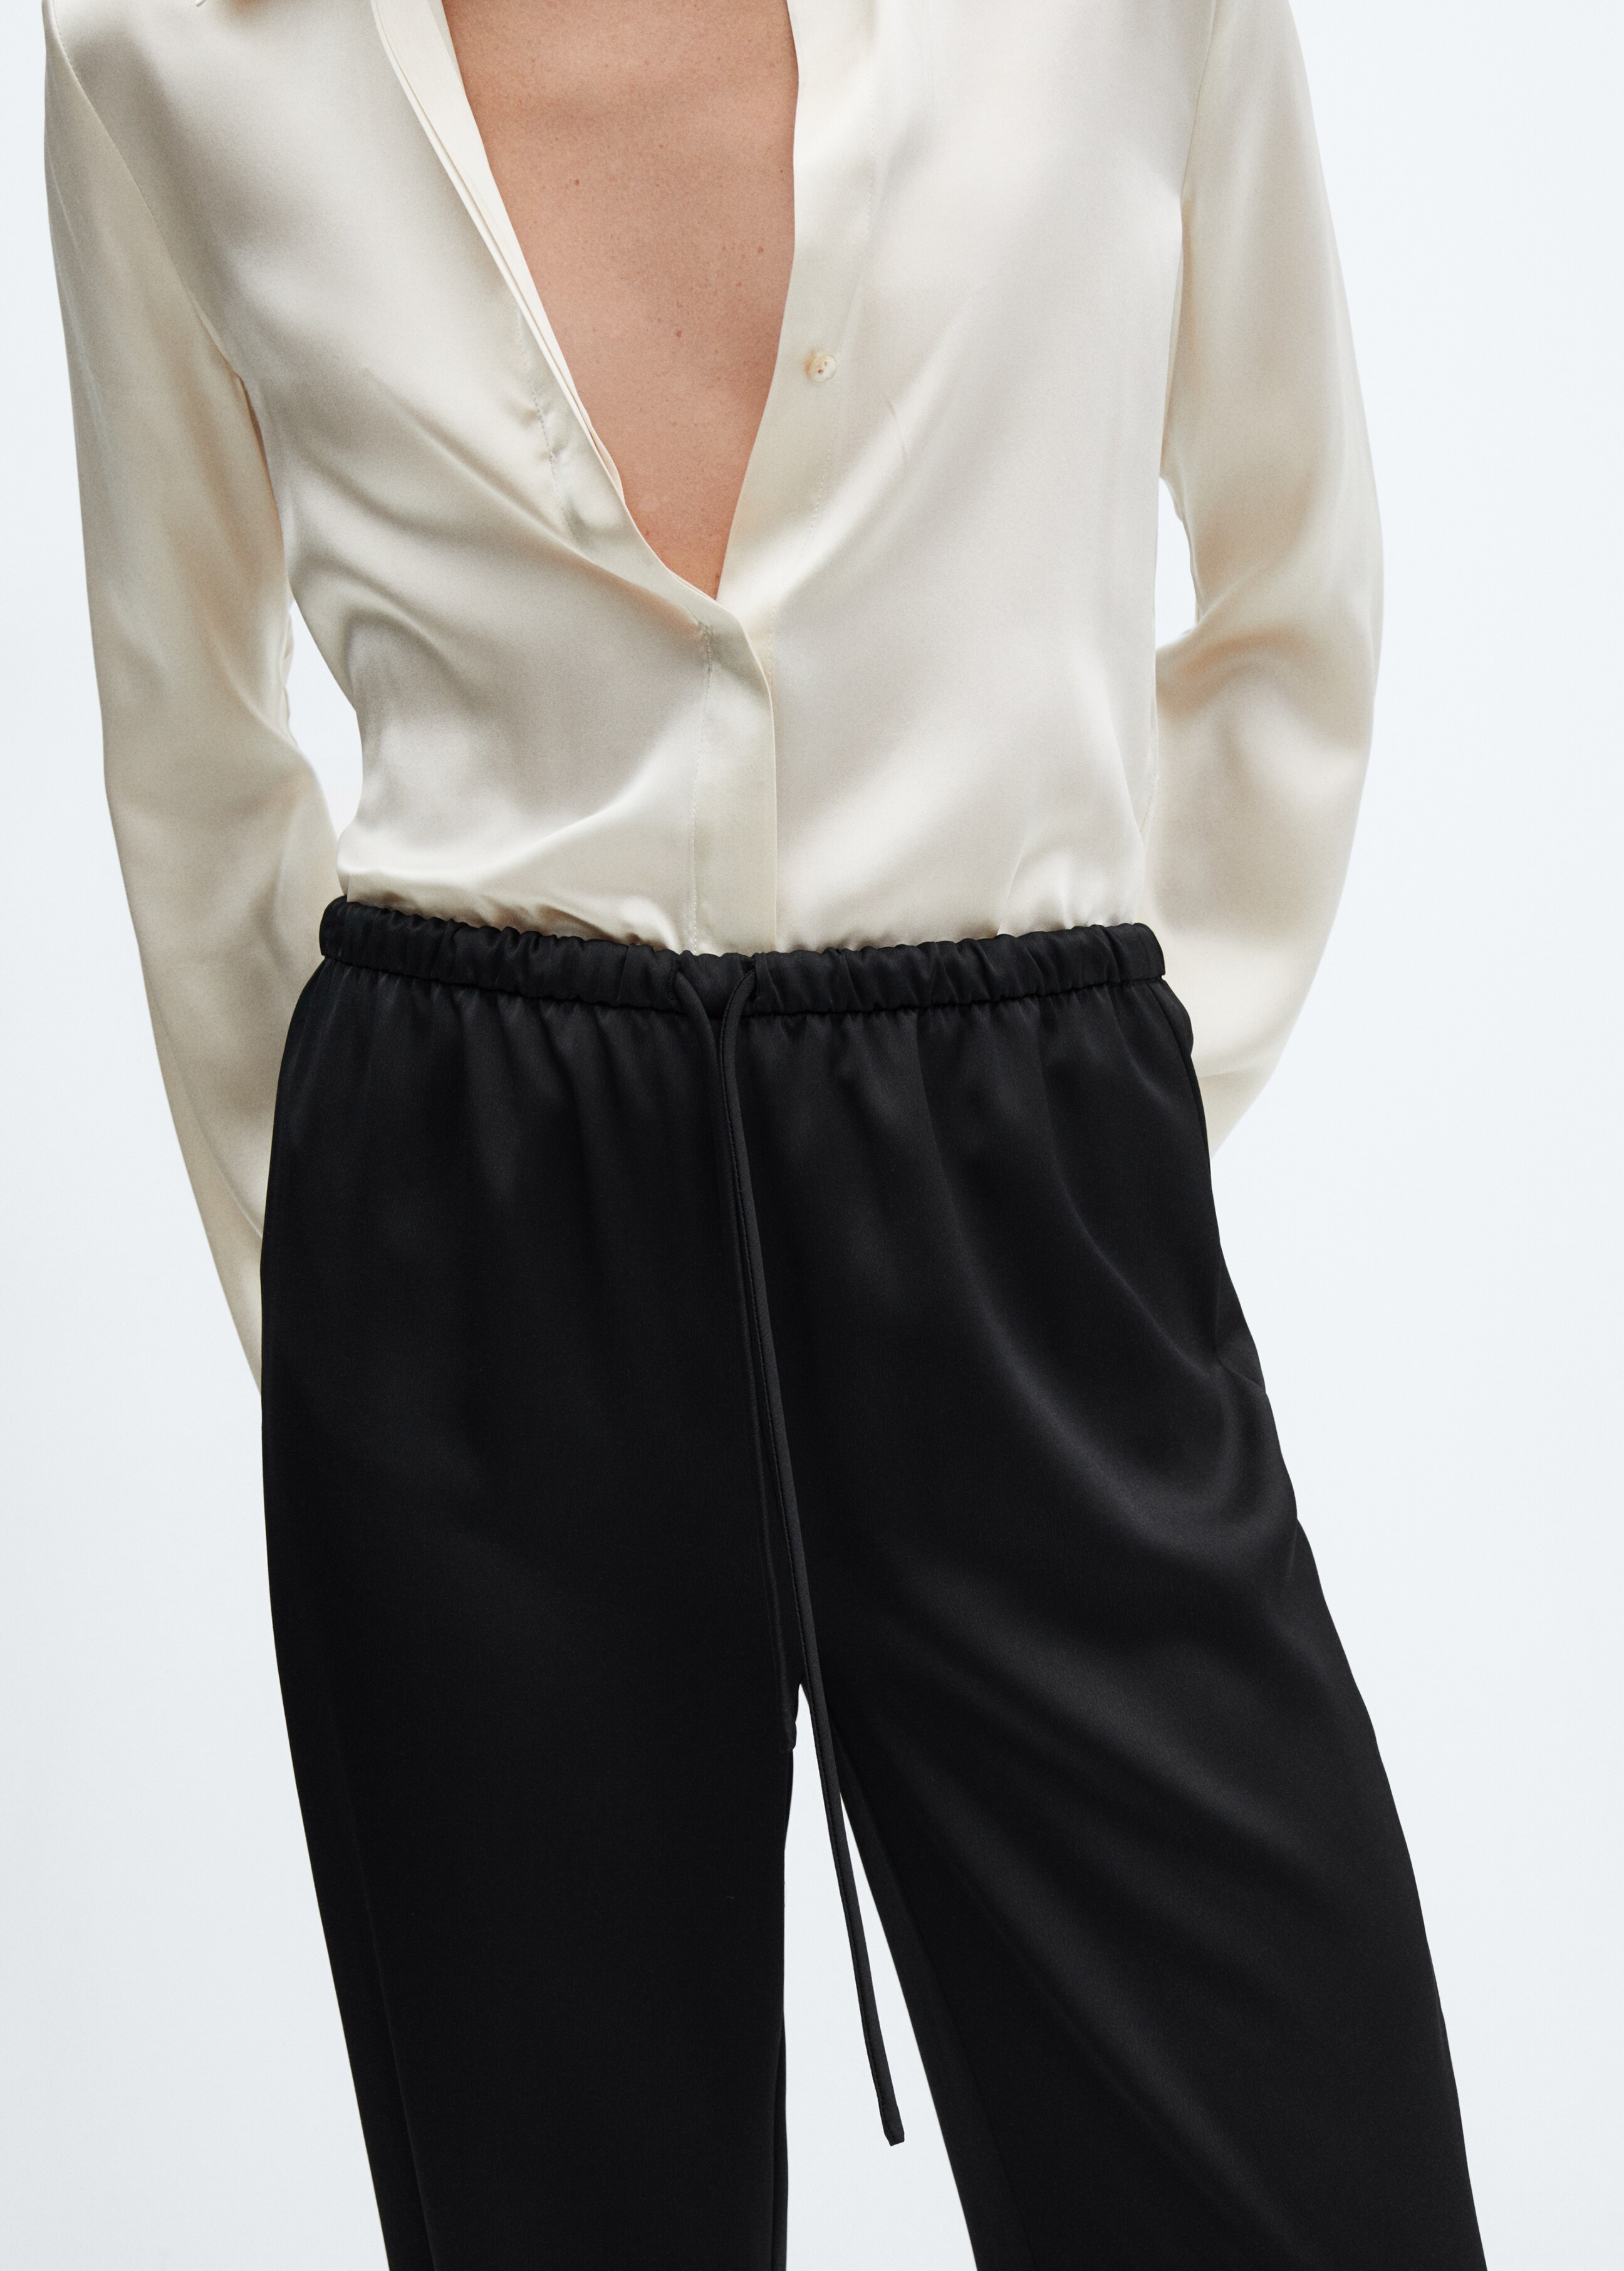 Satin-finish elastic waist pants - Details of the article 6